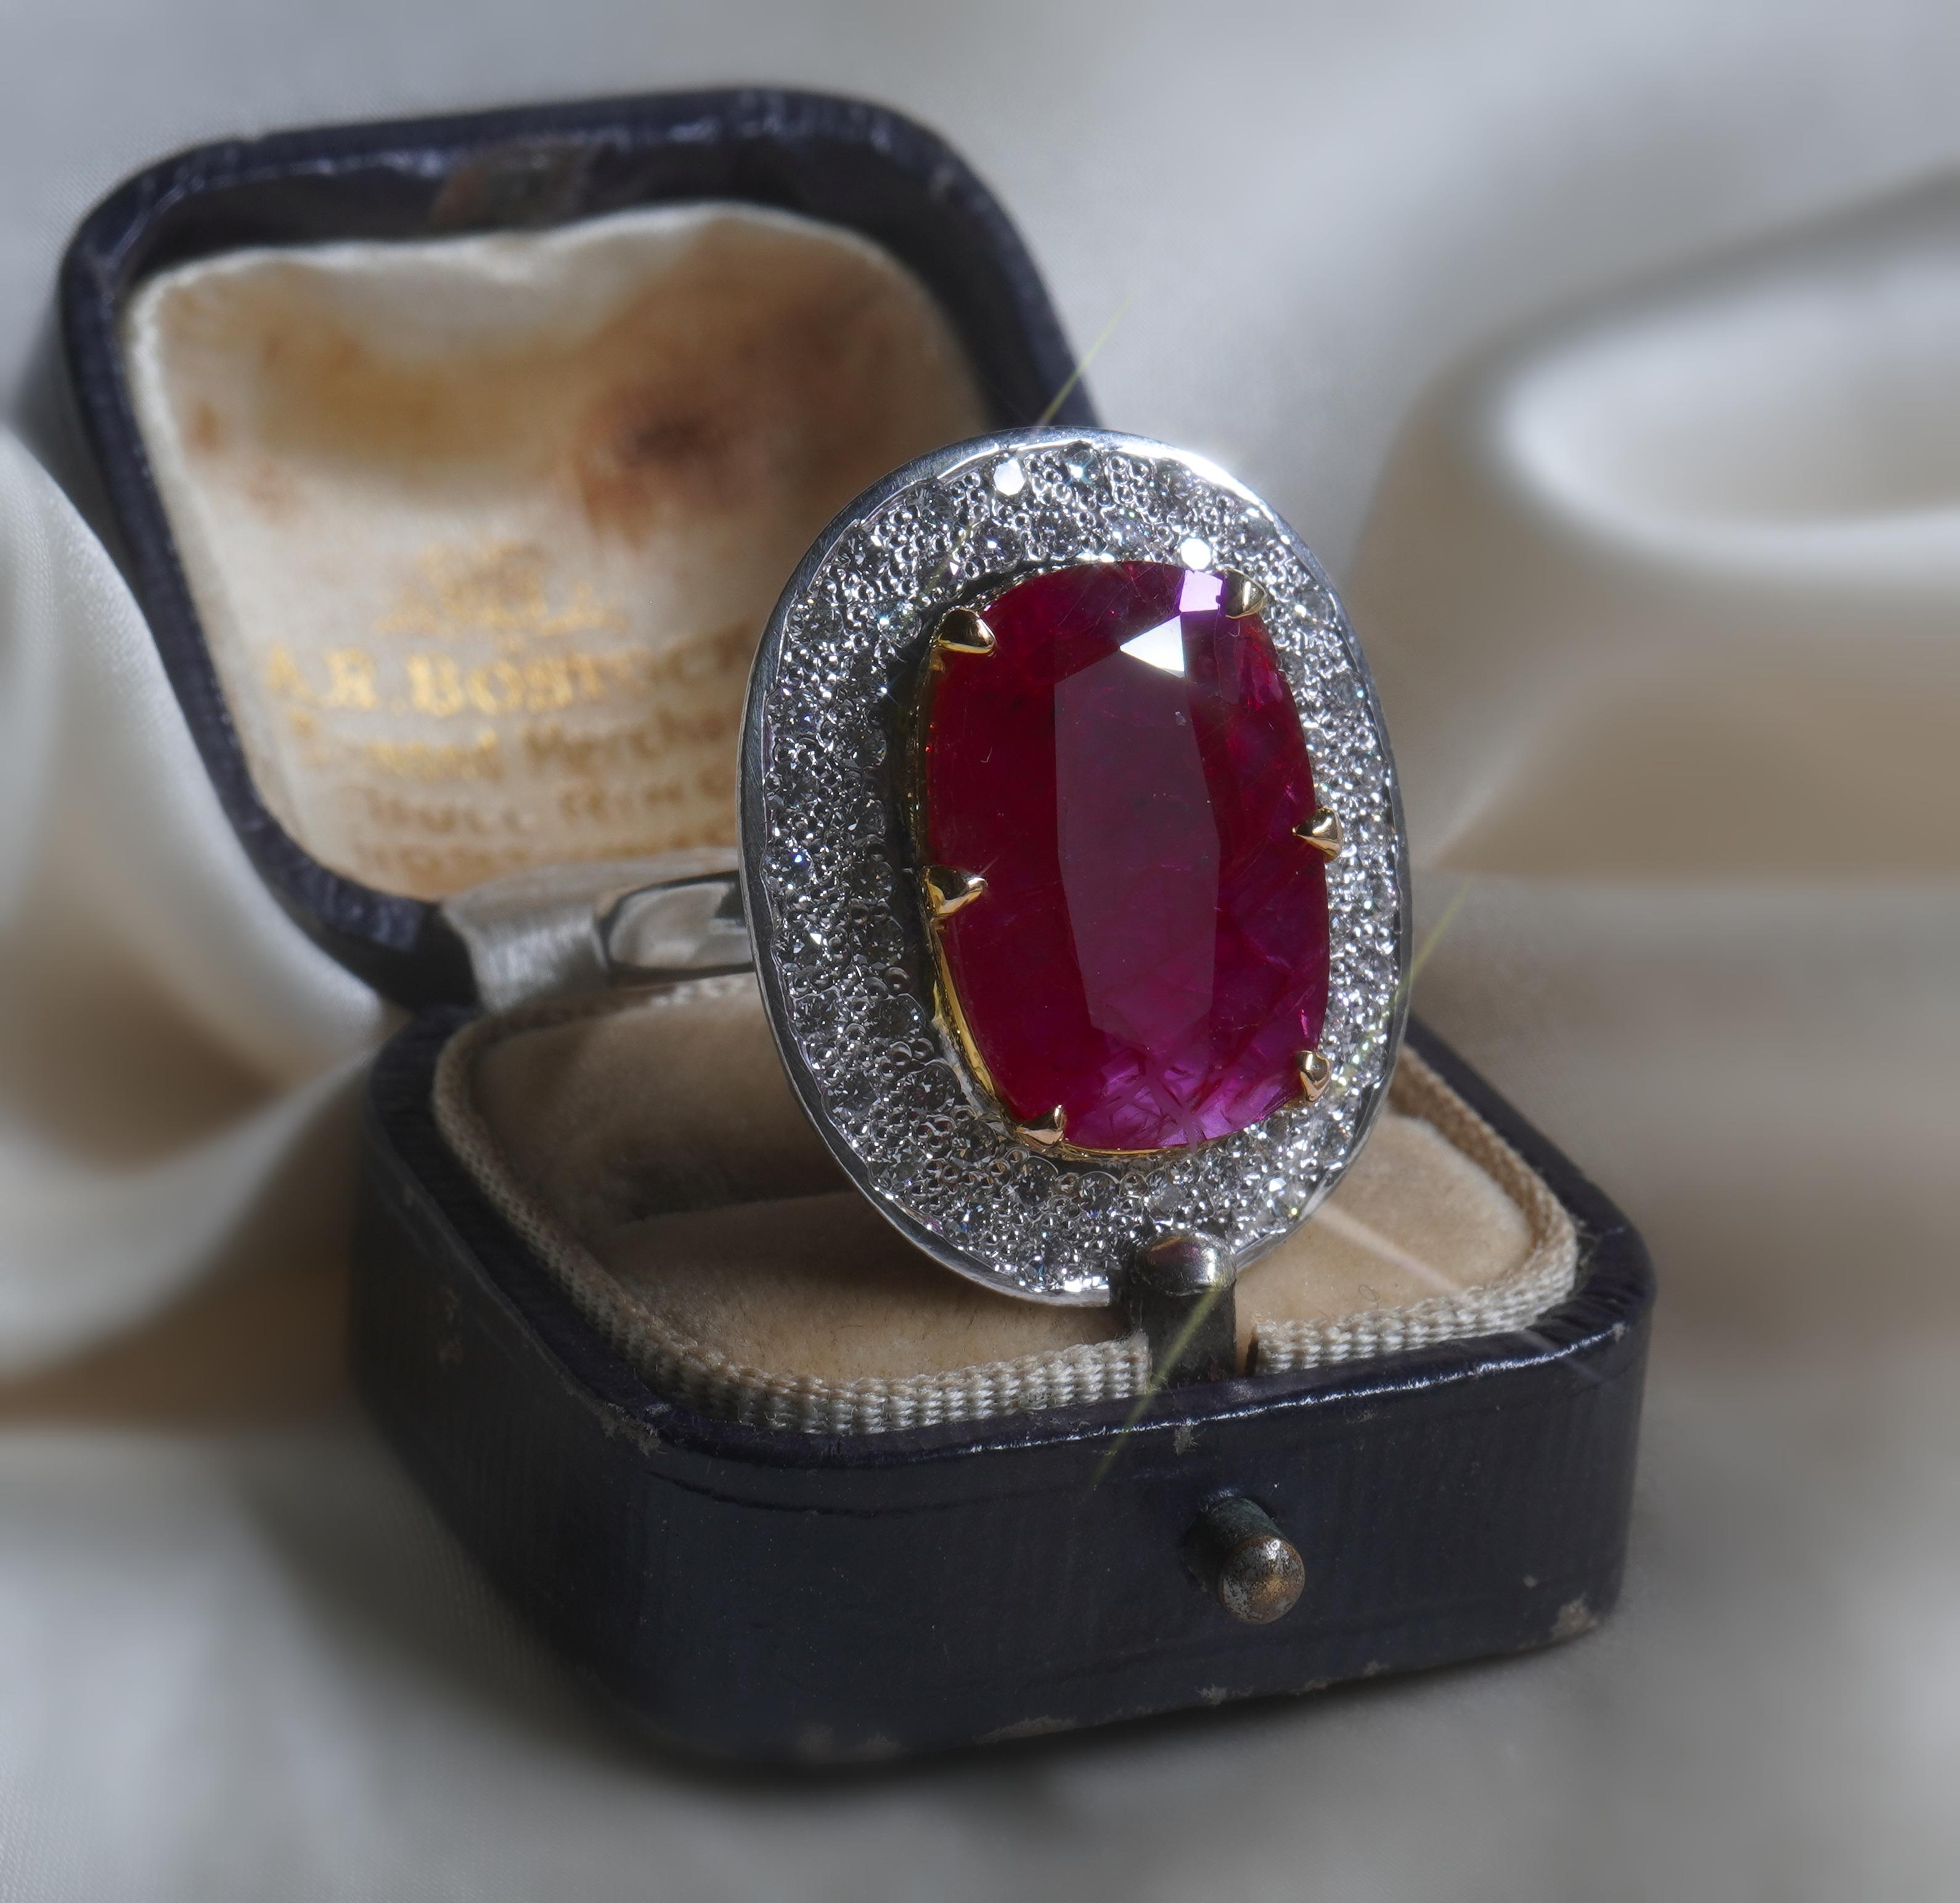 Old South Jewels proudly presents GIL CERTIFIED VINTAGE PLATINUM & 18K RED NO HEAT RUBY DIAMOND 11.43 CARAT VINTAGE RING!   Fine 10.35 Carat Rich Red Ruby Crowned With 1.08 Carats of Sparkling Diamonds White Eye Clean VS Diamonds.  RARE GIANT RUBY